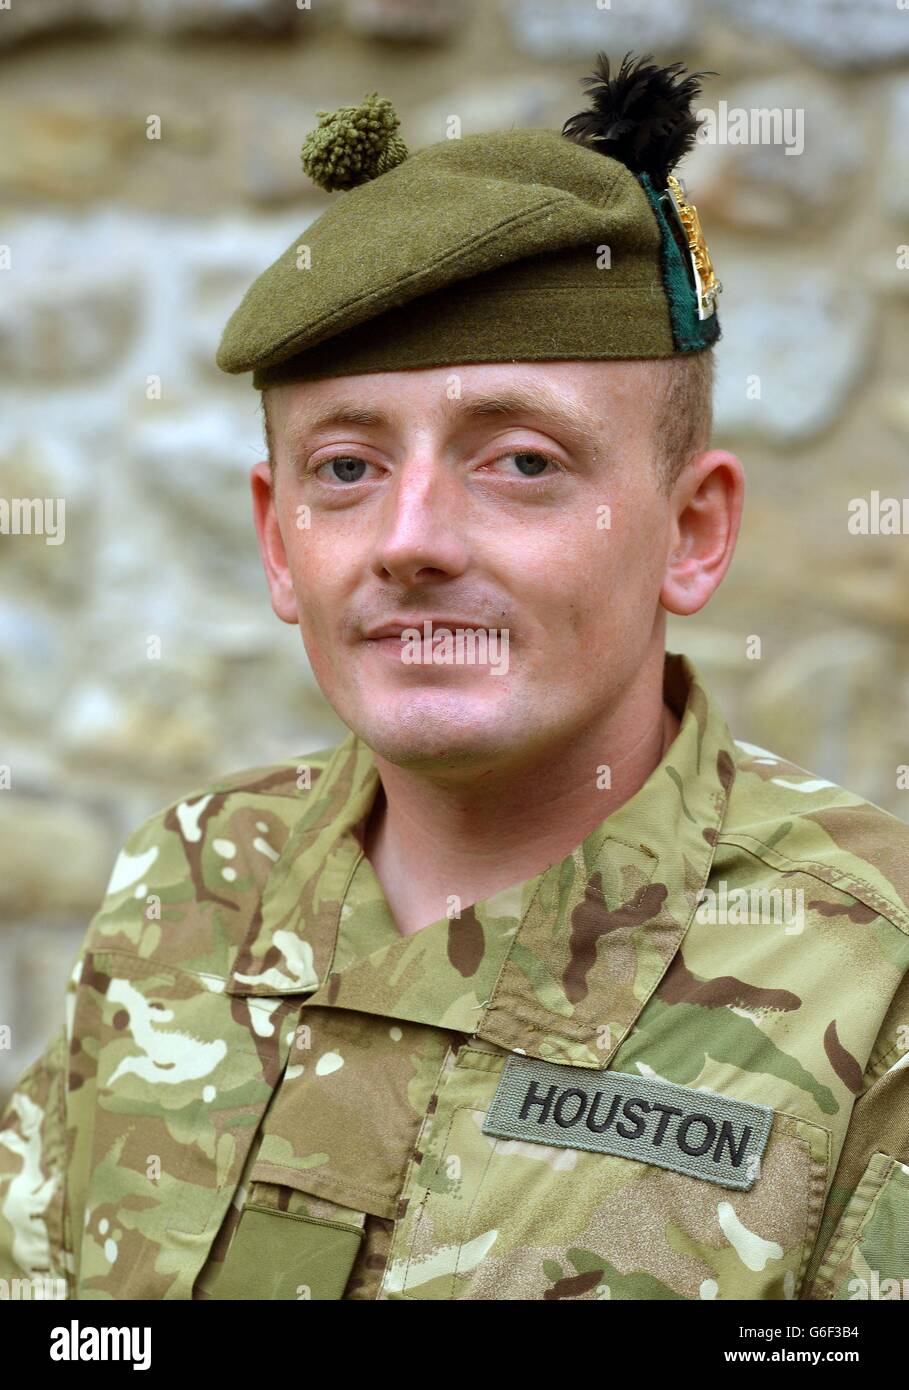 Pte Ryan Houston of the Royal regiment of Scotland who has been mentioned in despatches ahead of the full Operational Honours List 41 that will be published in the London Gazette on Friday. Stock Photo